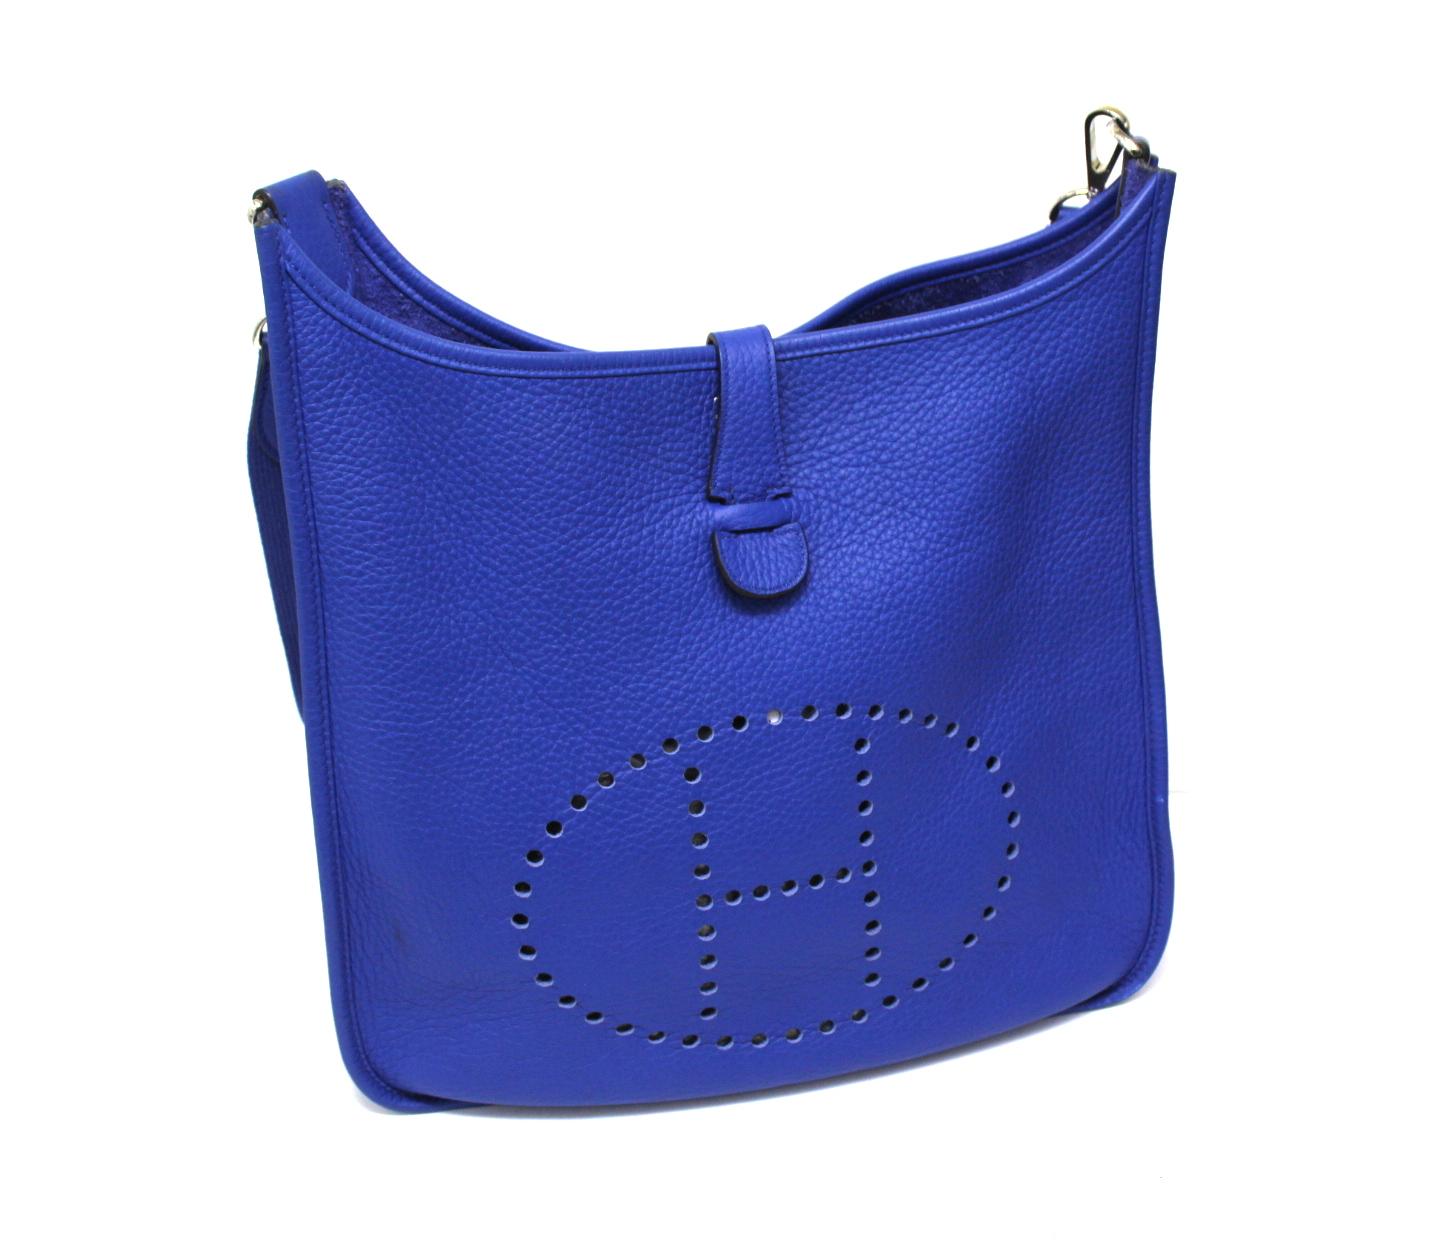 Hermès bag, Evelyne model, made of electric blue leather, with silver hardware.
The bag is equipped with a button closure, internally lined in blue suede, quite roomy.
In addition, the product has a removable shoulder handle, made of fabric, 5